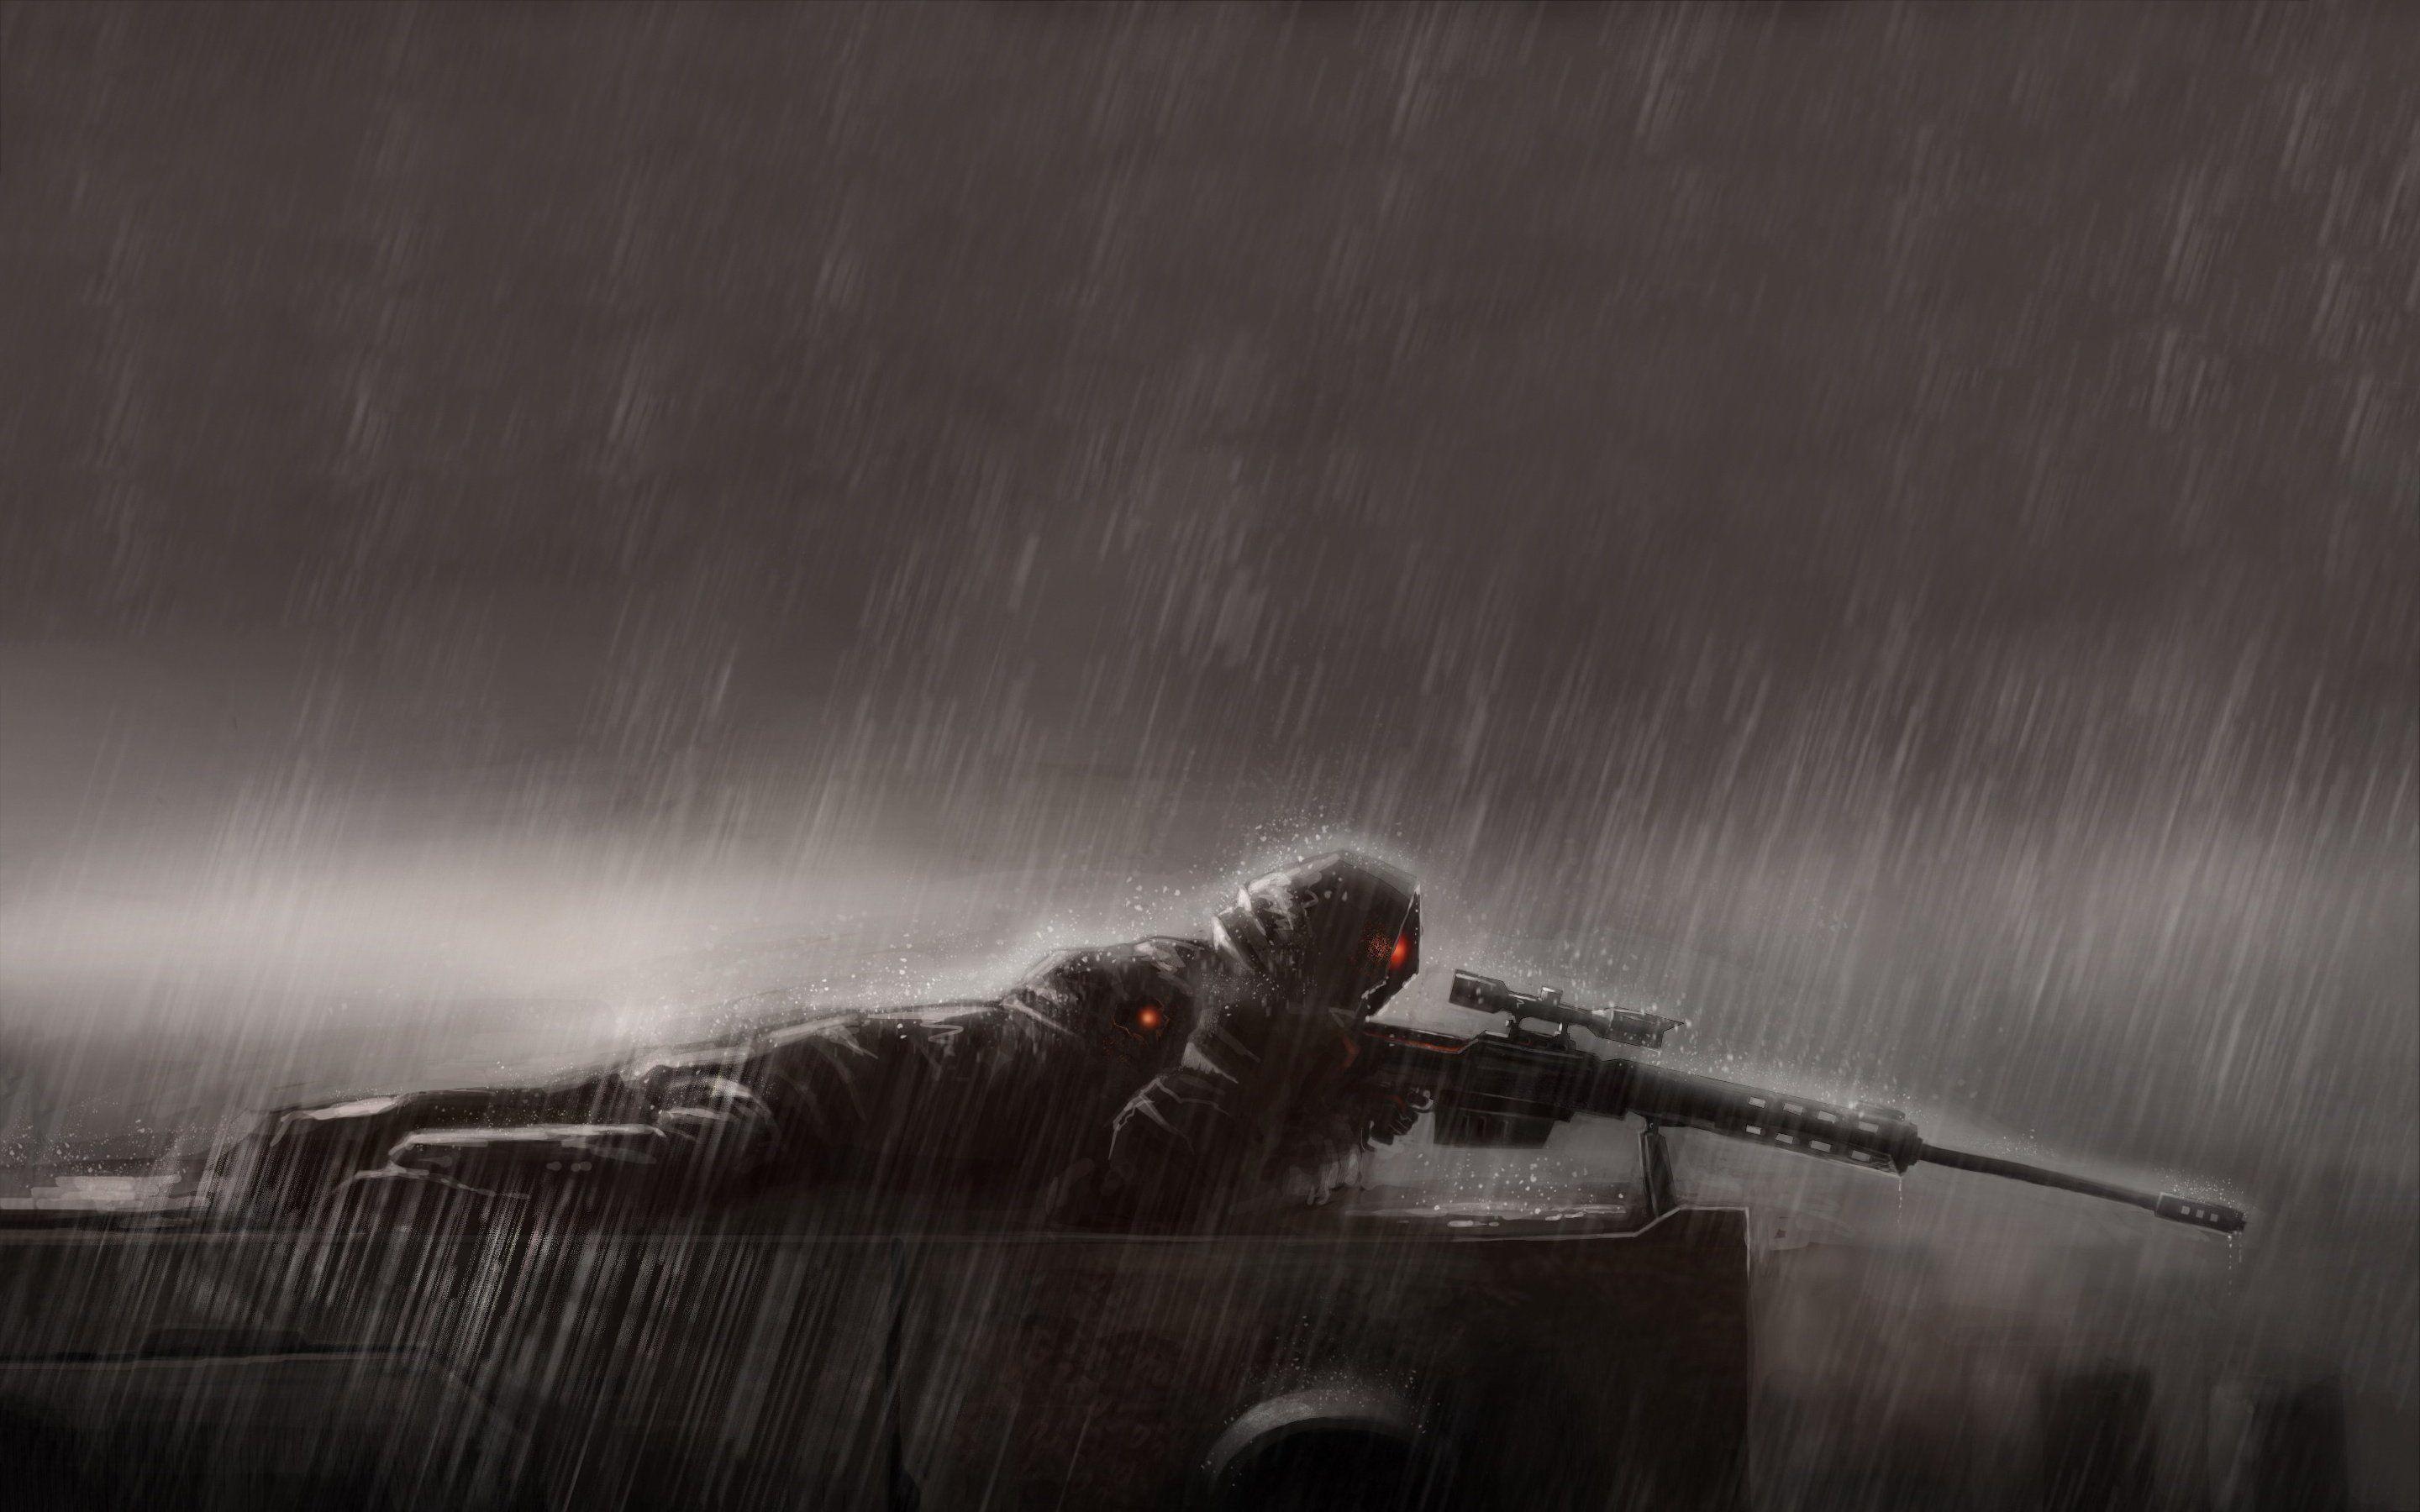 Free Sniper Wallpaper, Best & Inspirational High Quality Free